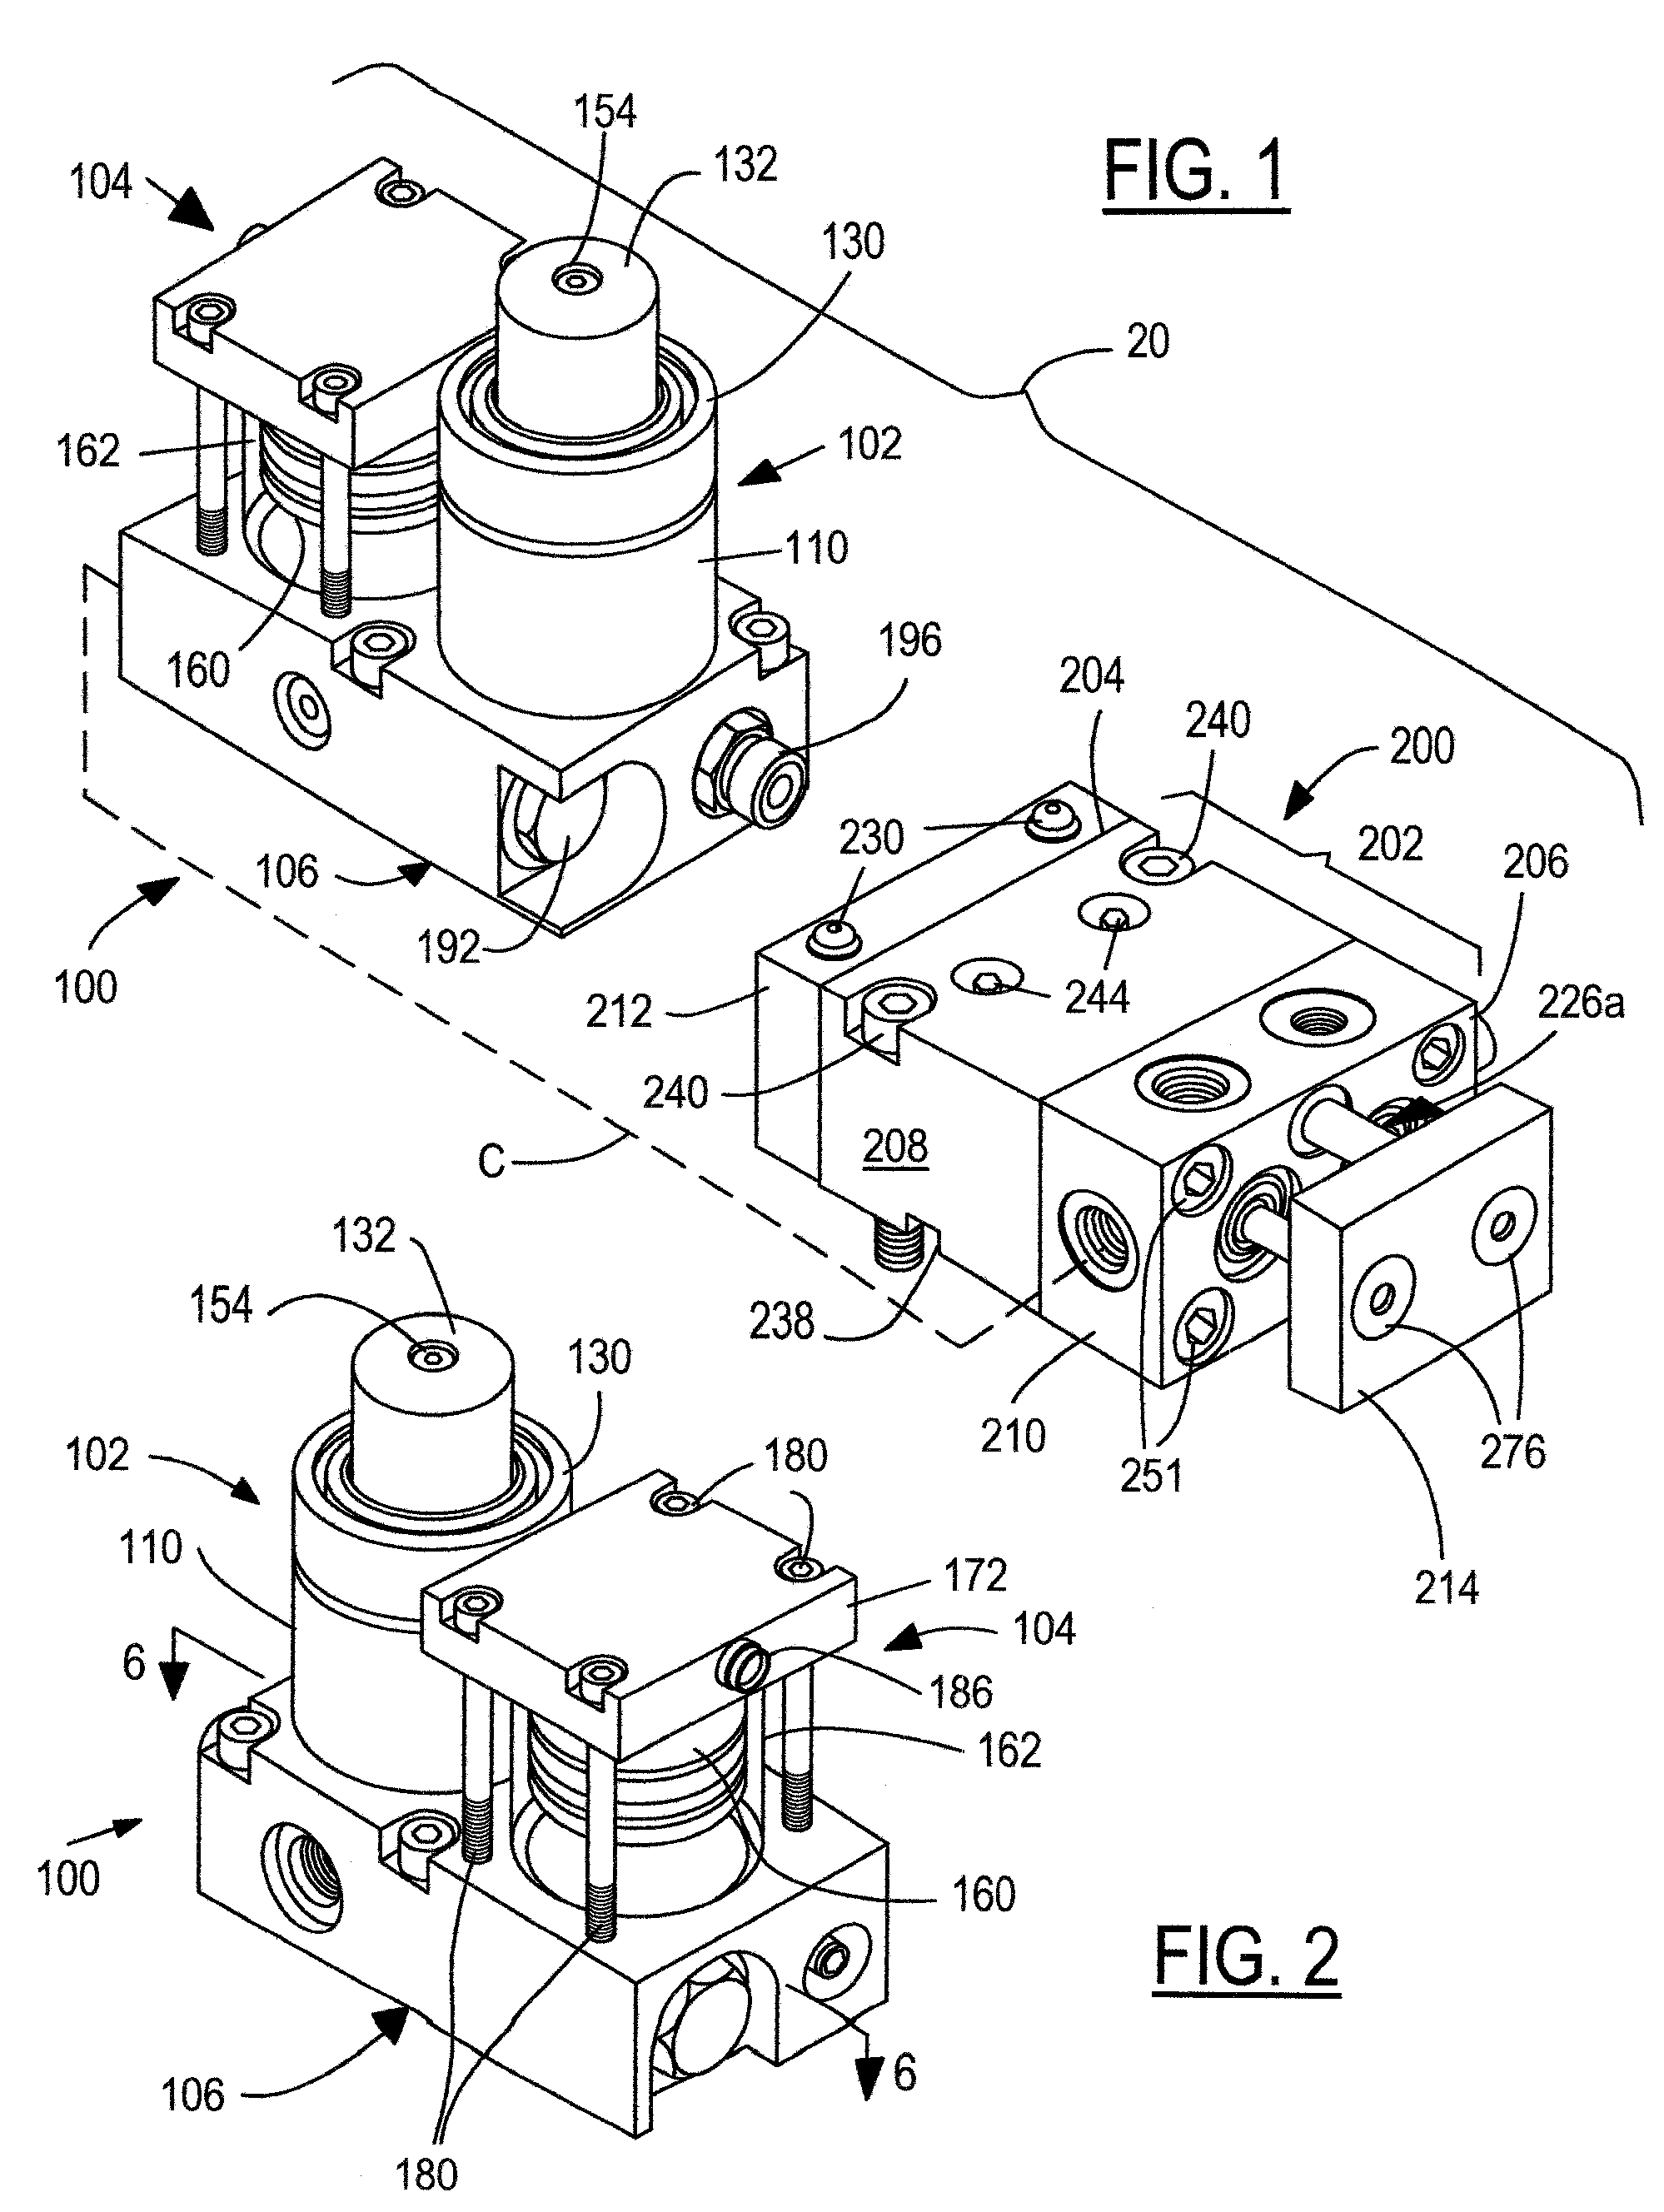 Press-driven tool actuation system